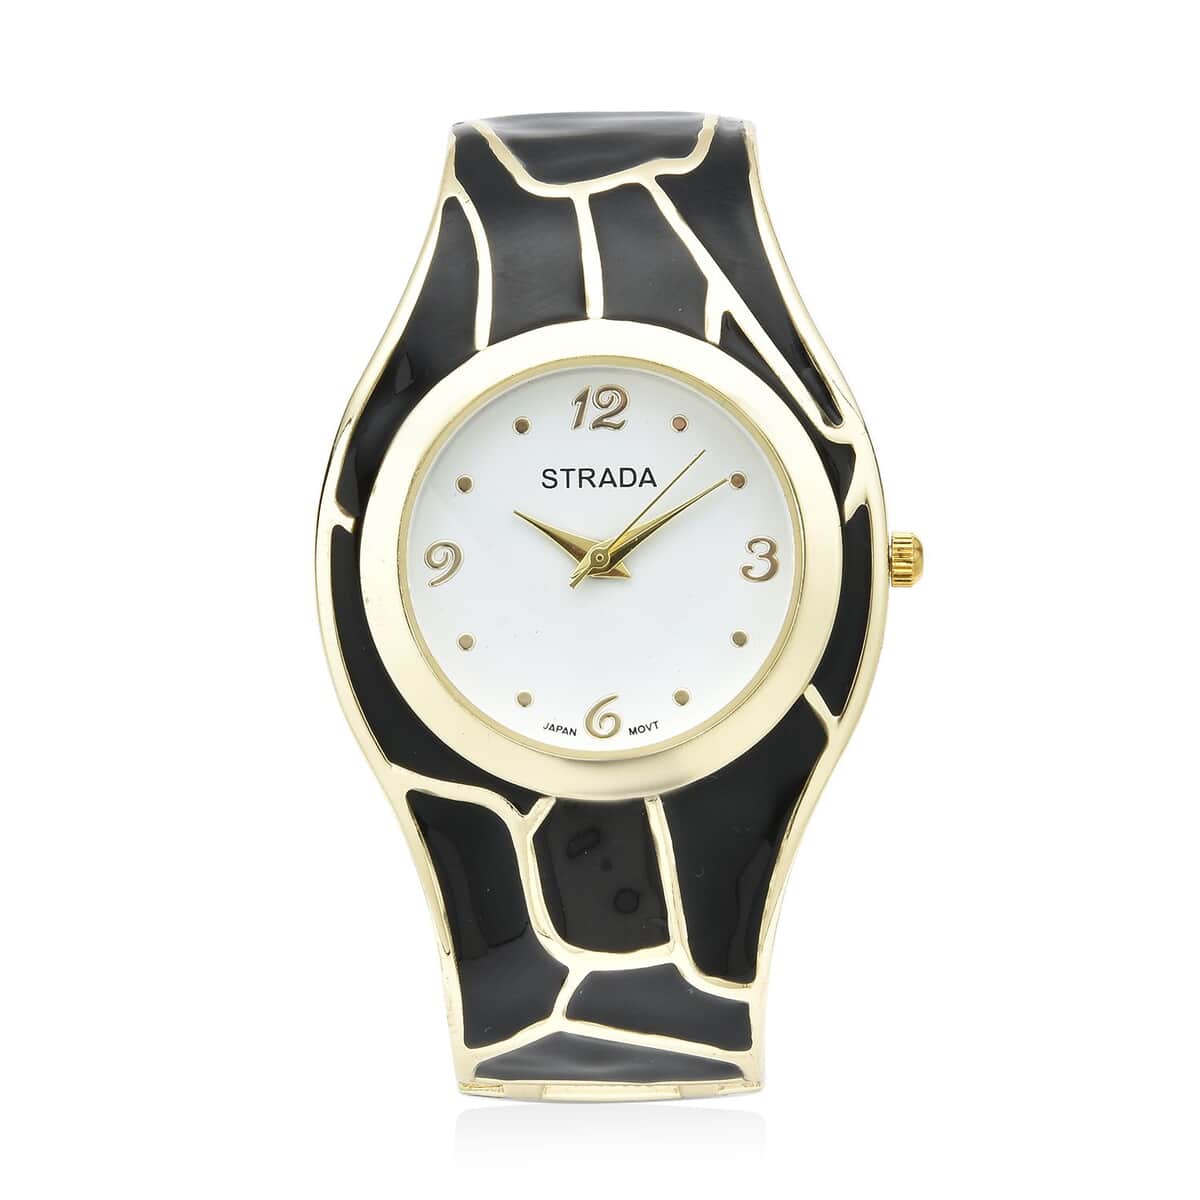 STRADA Black Enameled Japanese Movement Watch in Goldtone Strap (29.50mm) (7.0-7.75 Inch) image number 0